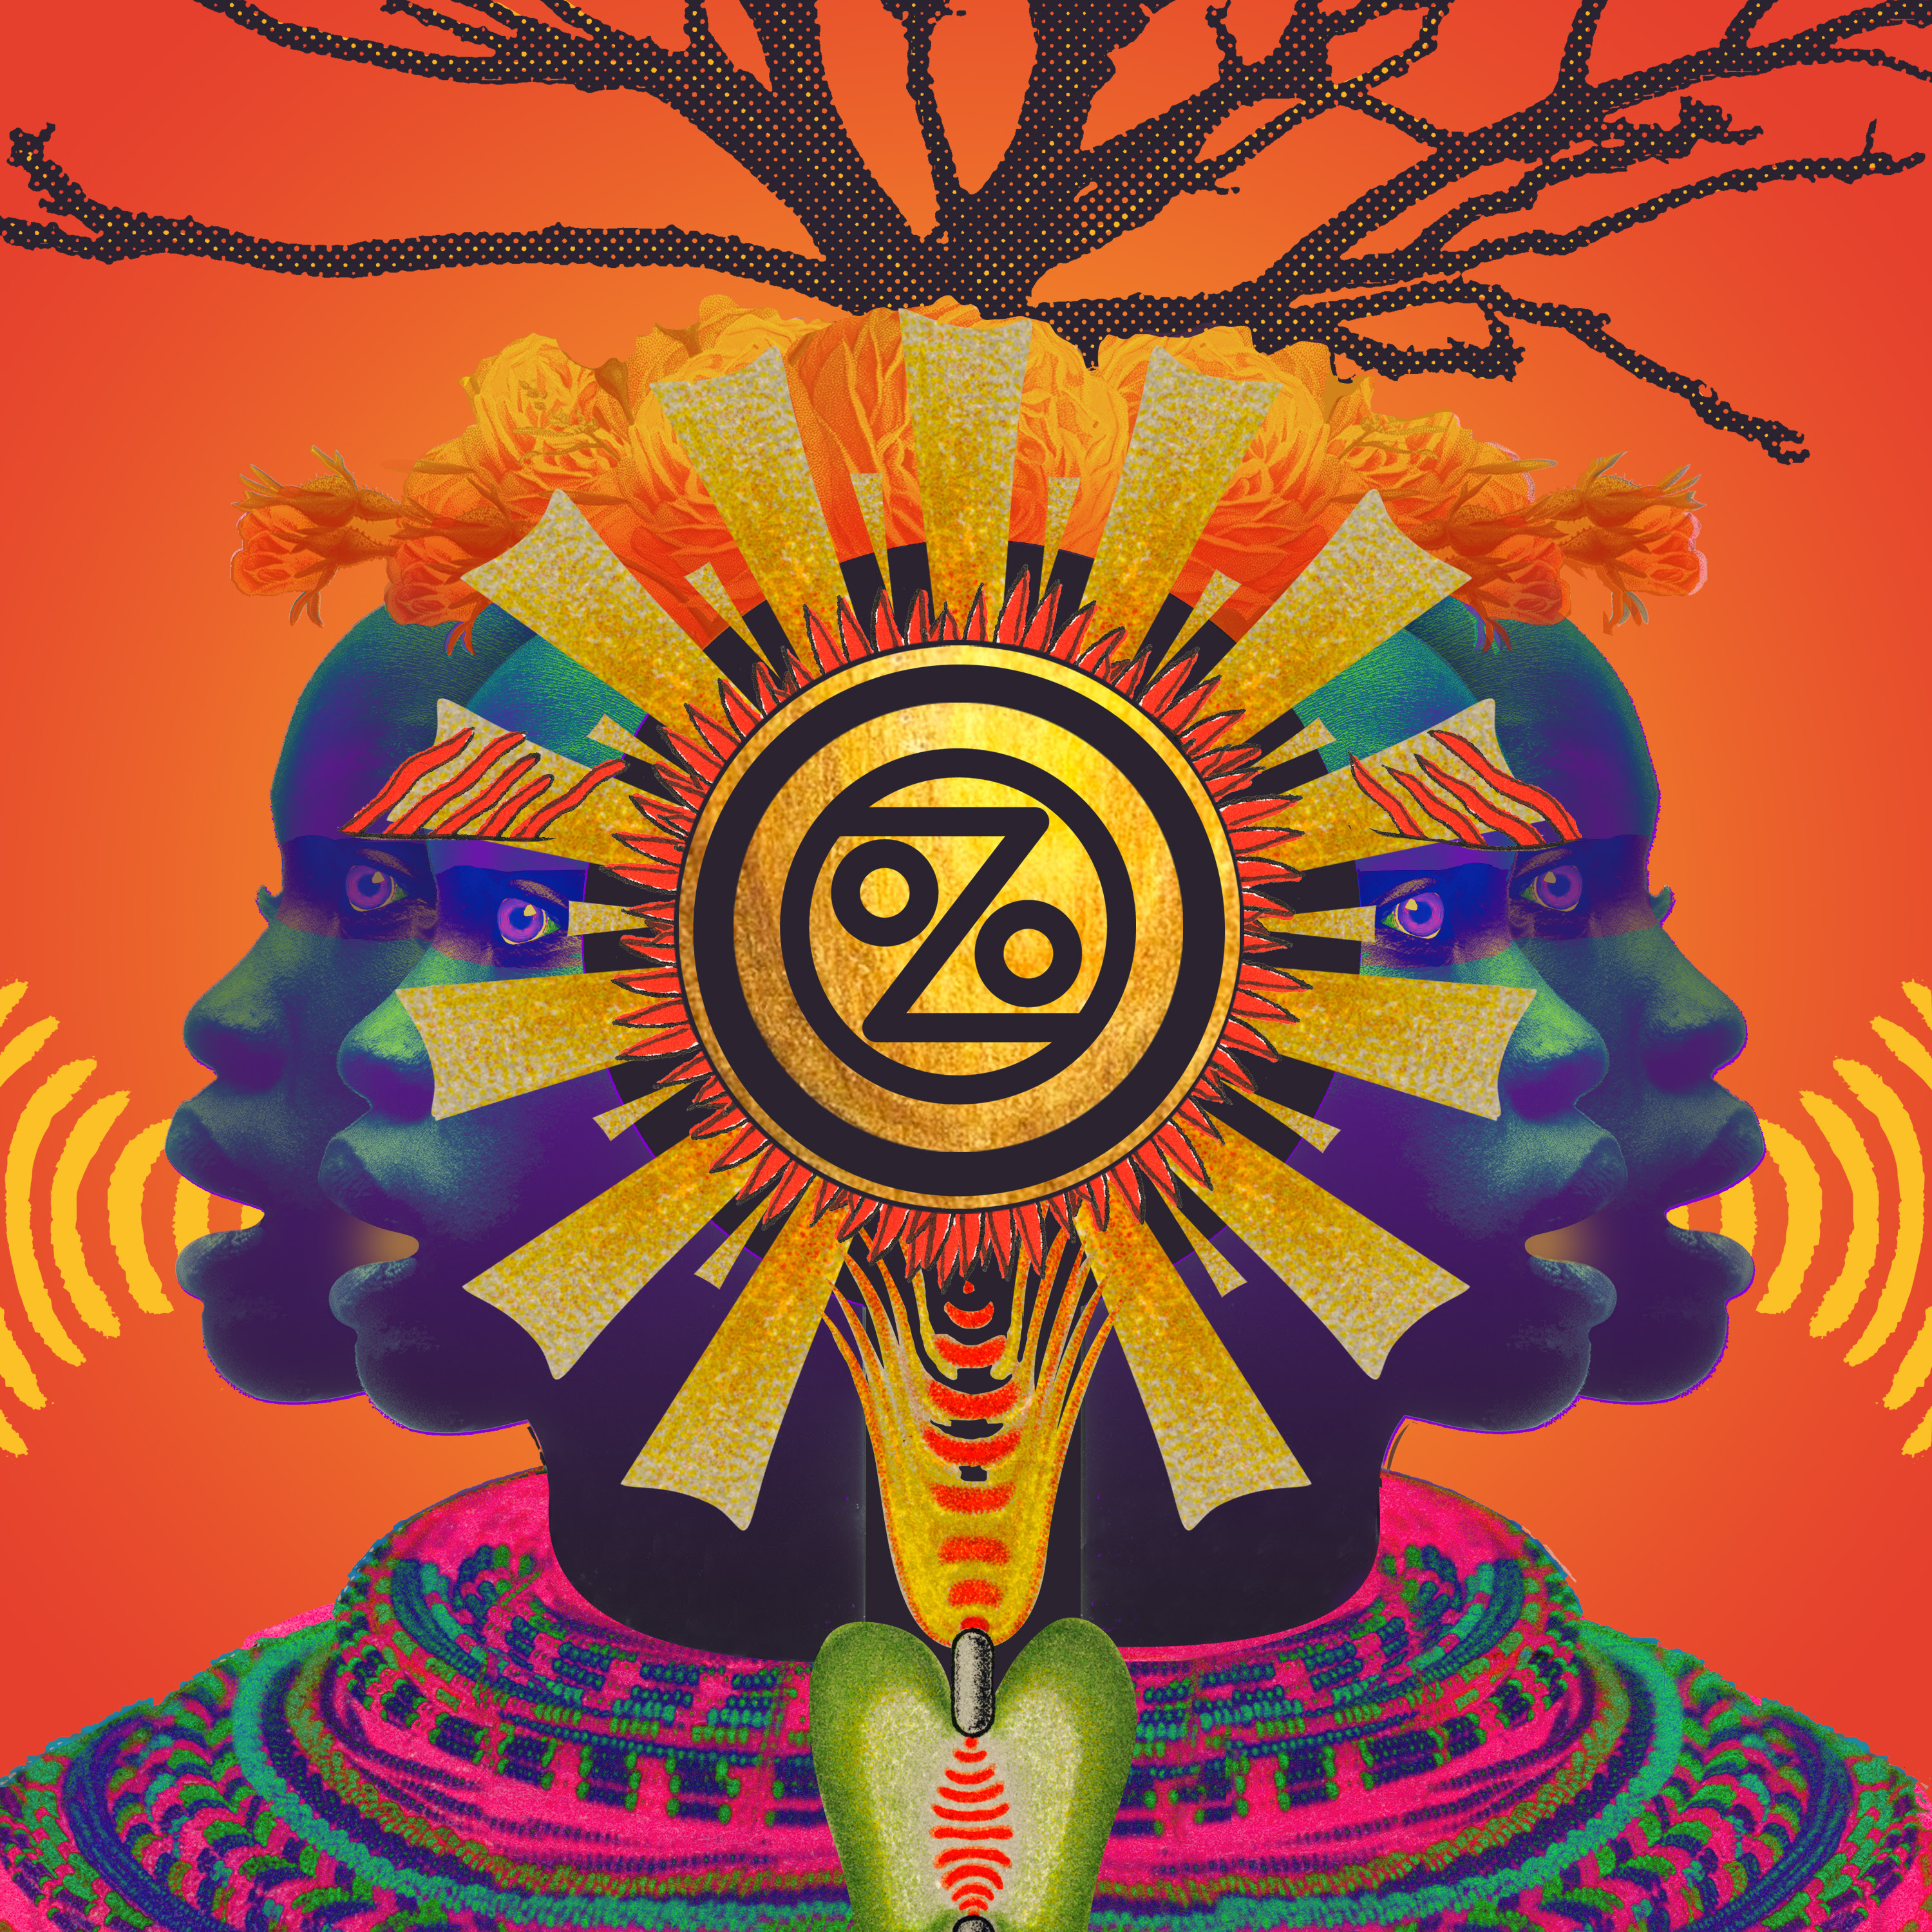 OZOMATLI Announce Release of new Studio Album - "Marching On" out this July...New Single Available Today